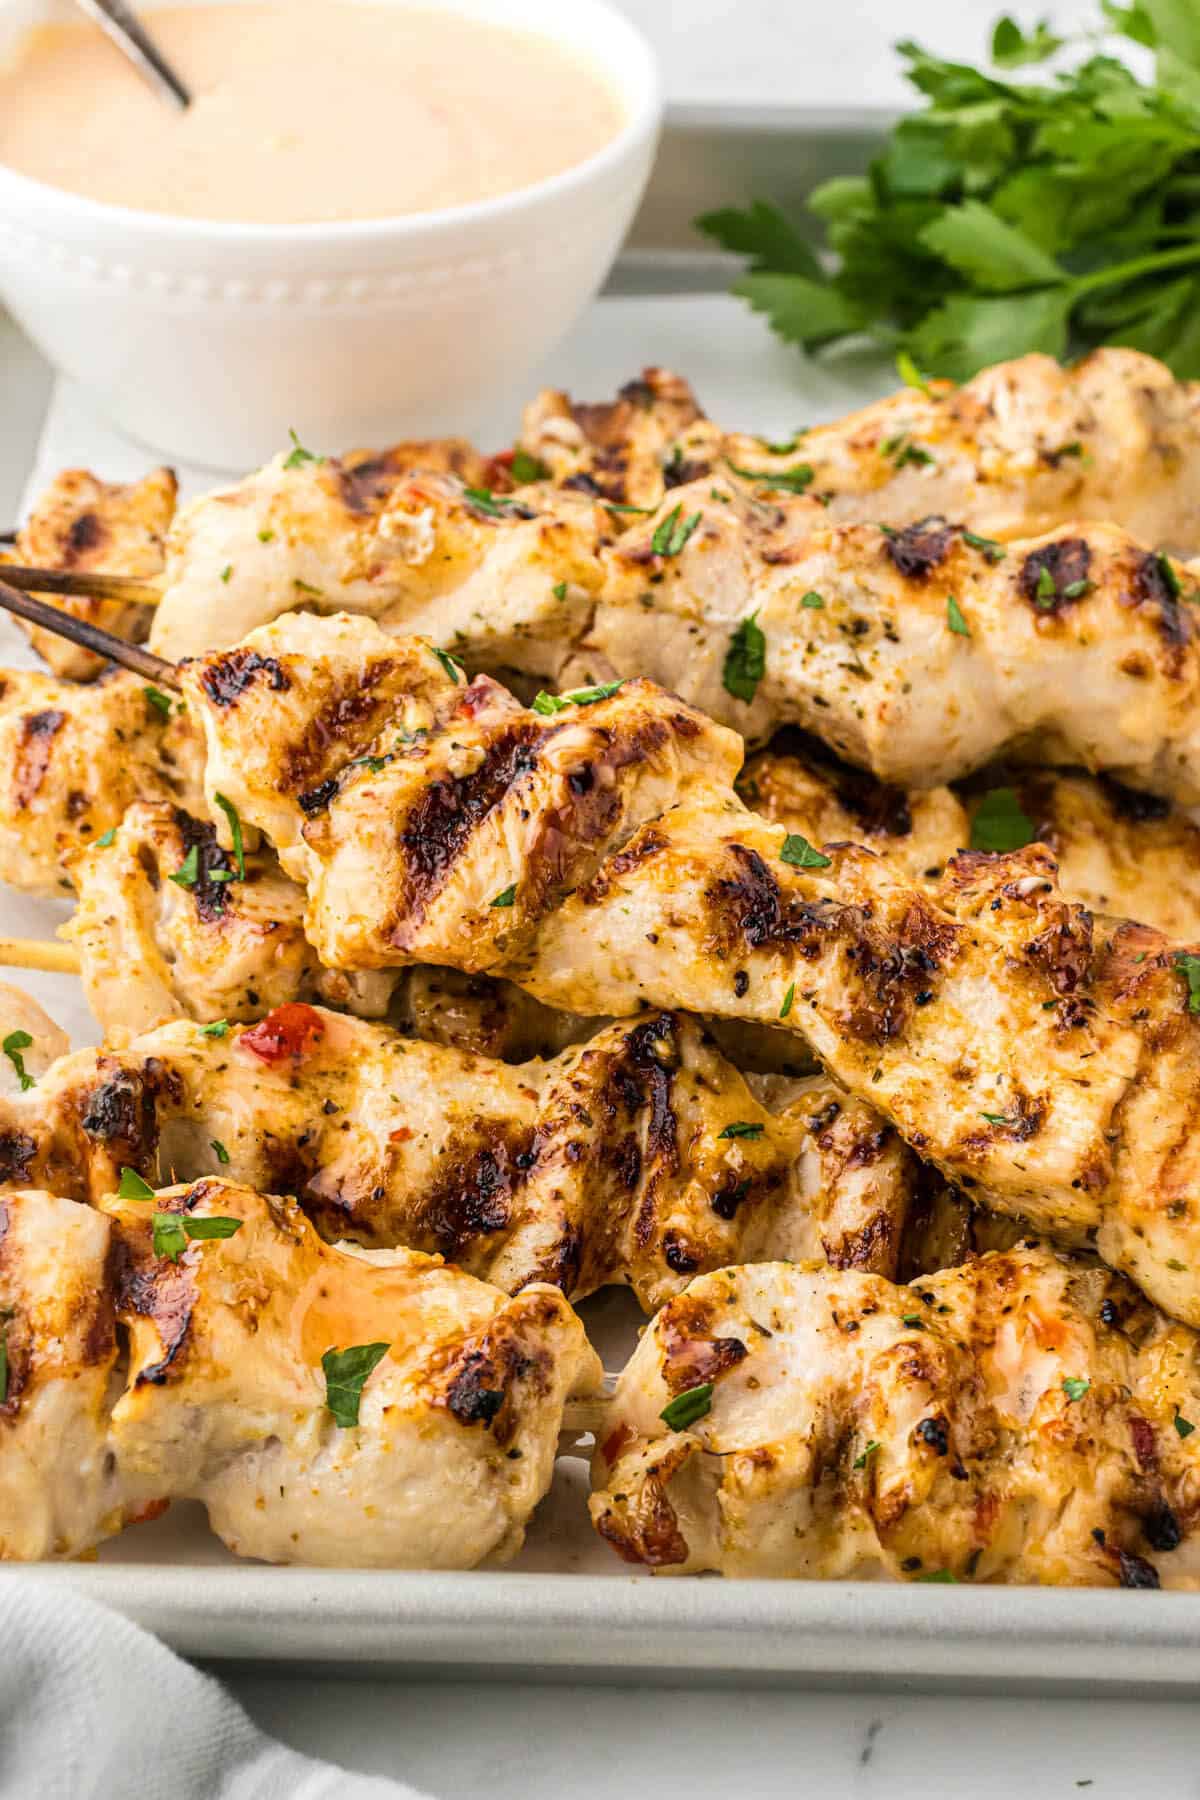 A platter filled with grilled chicken kabobs.